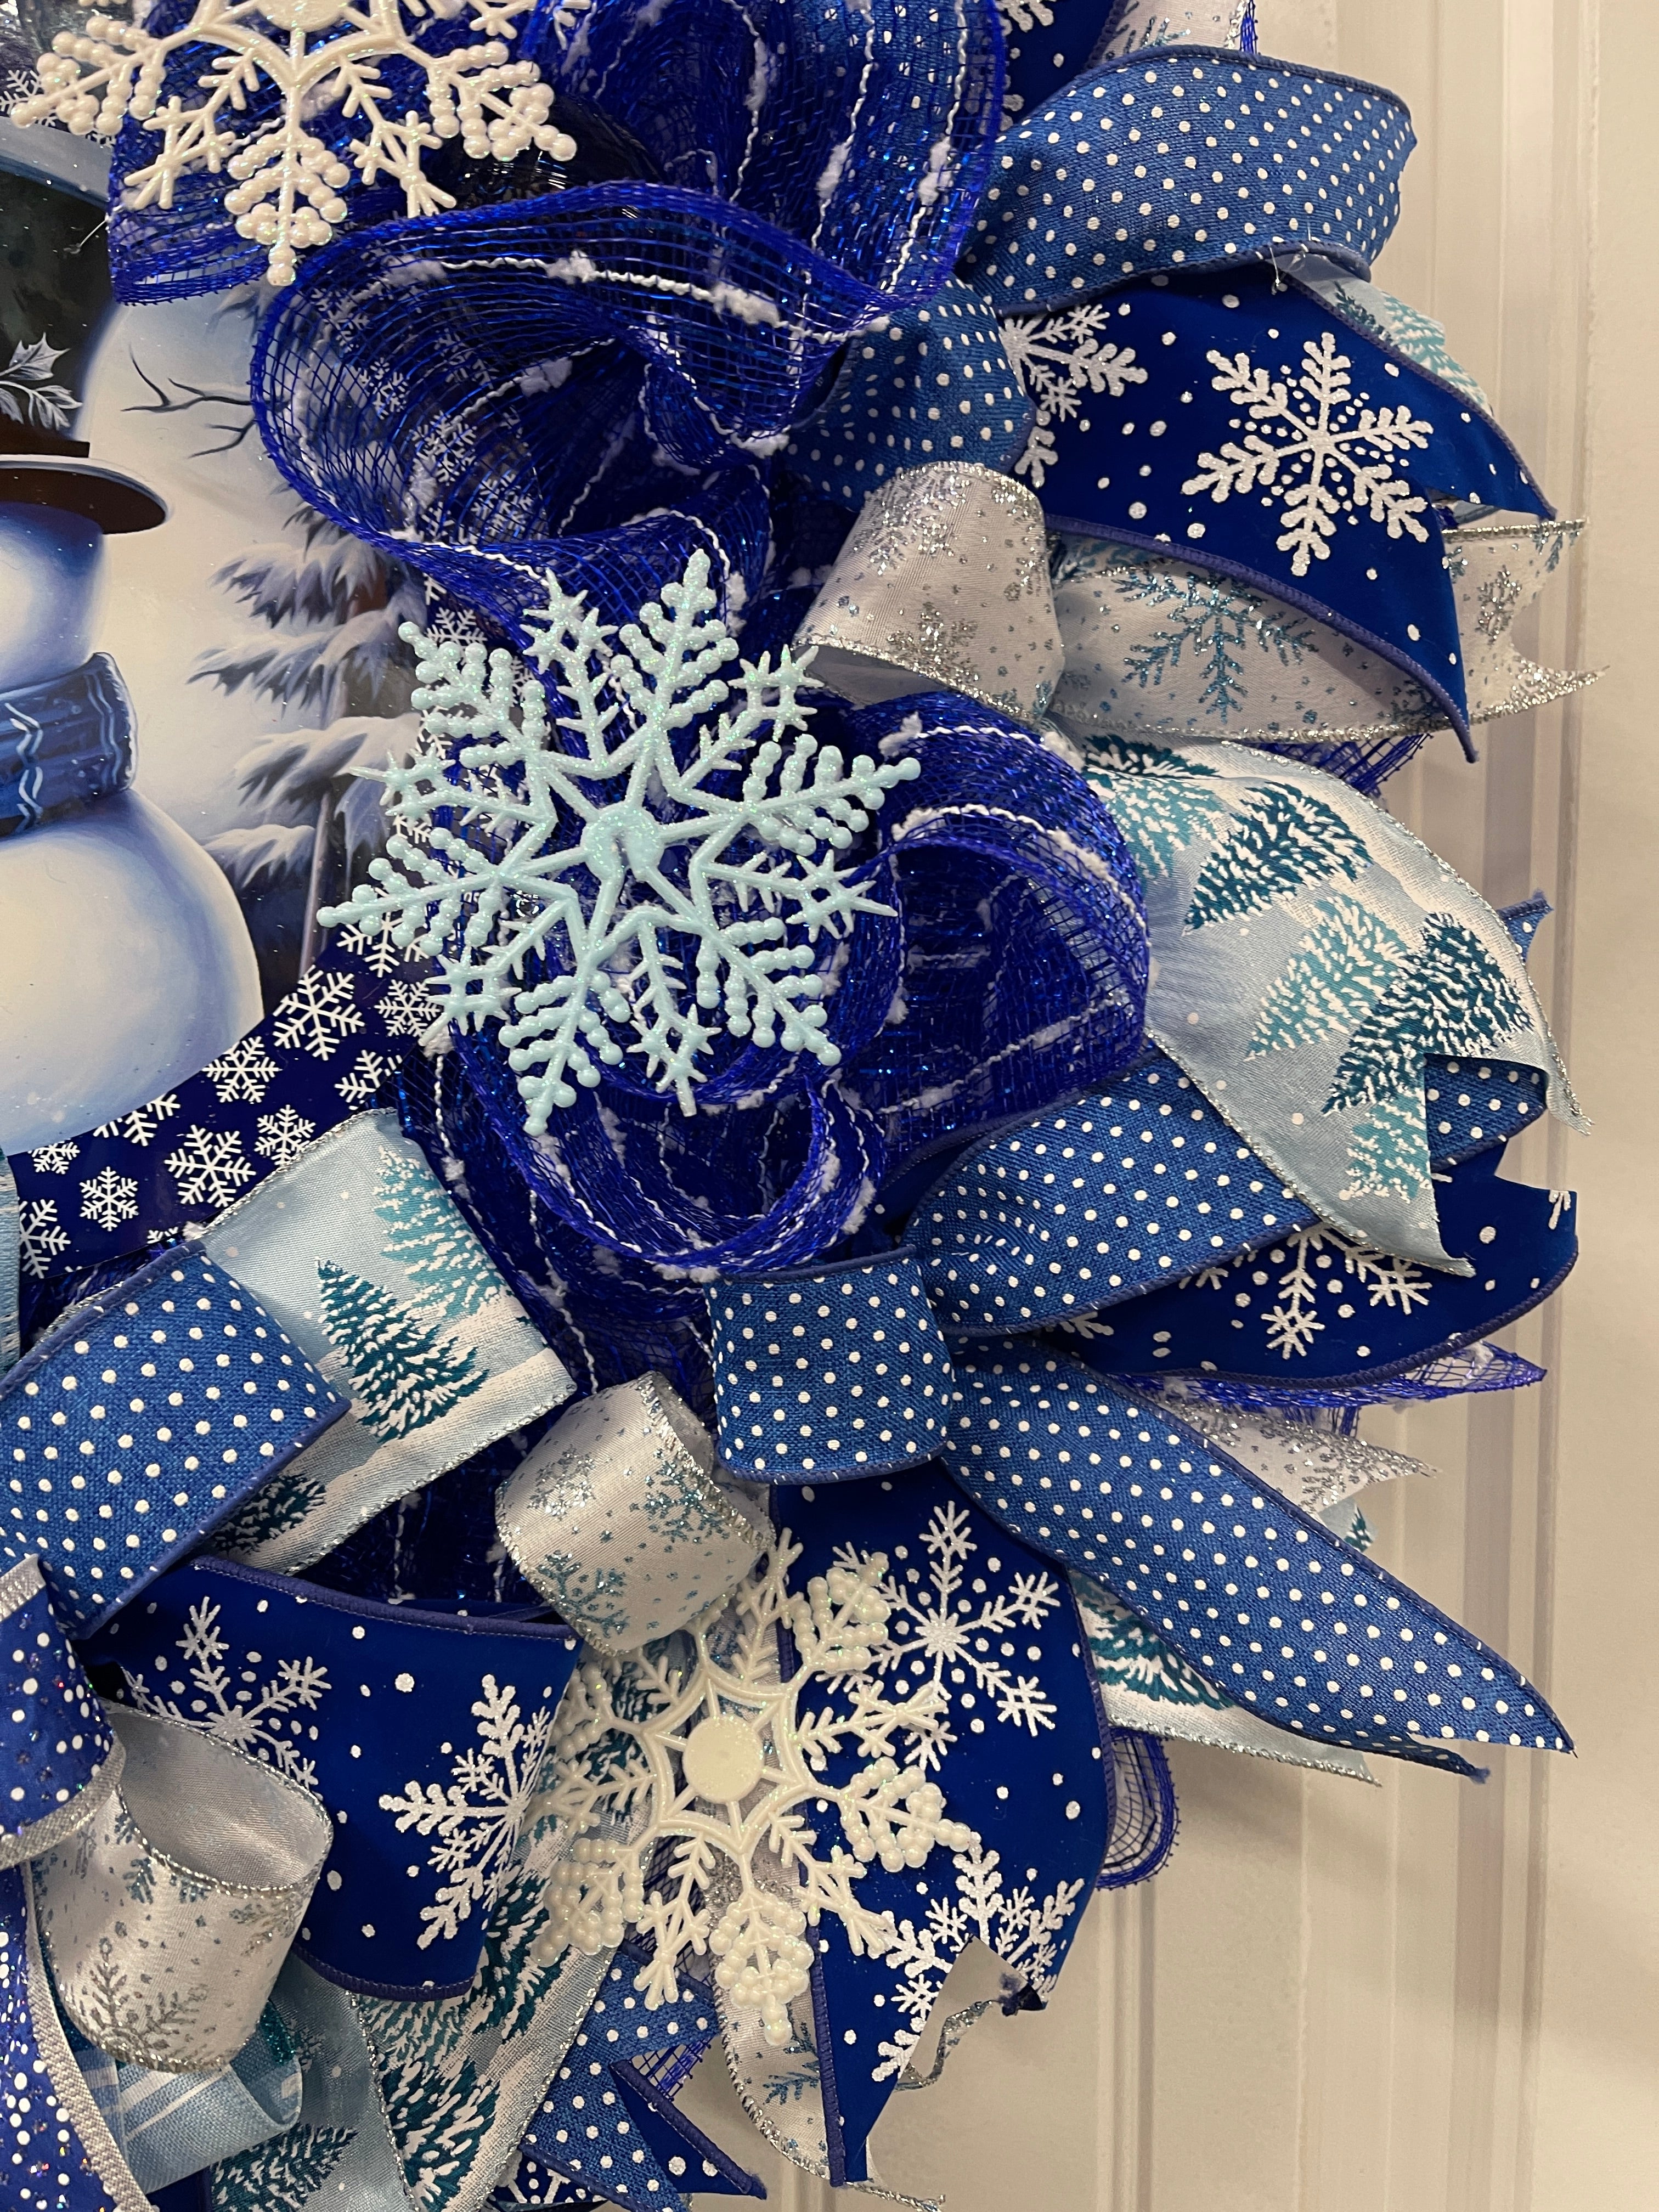 Blue Winter Snowman Christmas Wreath for Front Door by KatsCreationsNMore